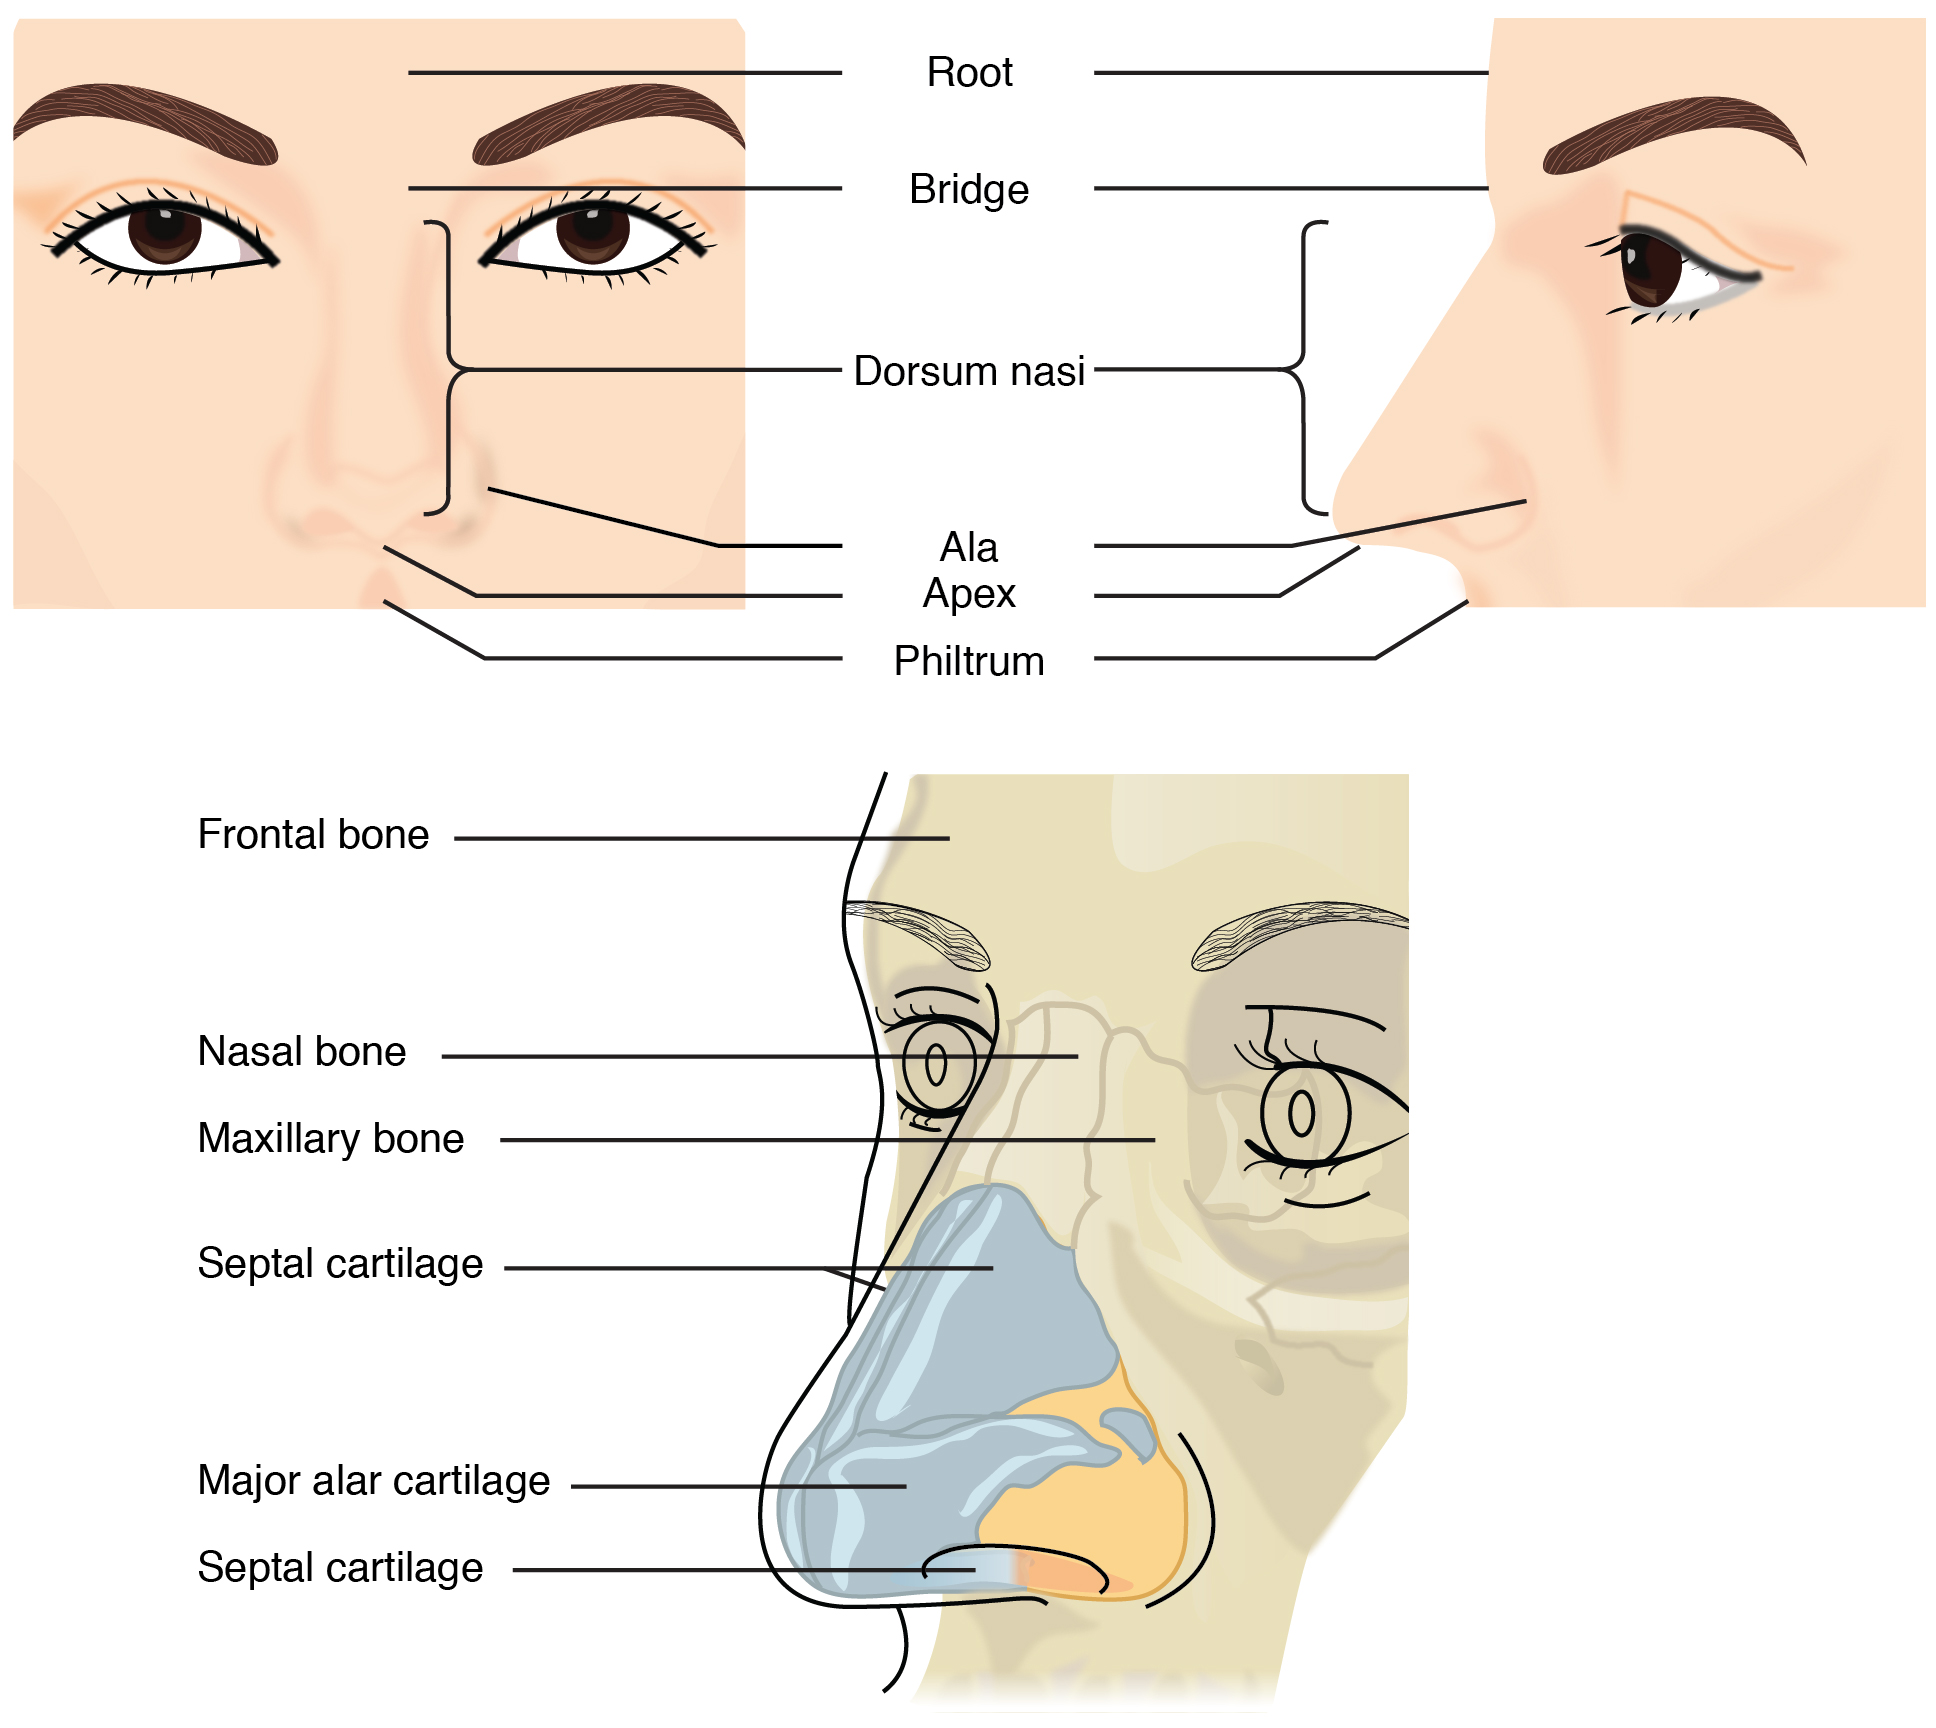 This figure shows the human nose. The top left panel shows the front view, and the top right panel shows the side view. The bottom panel shows the cartilaginous components of the nose.